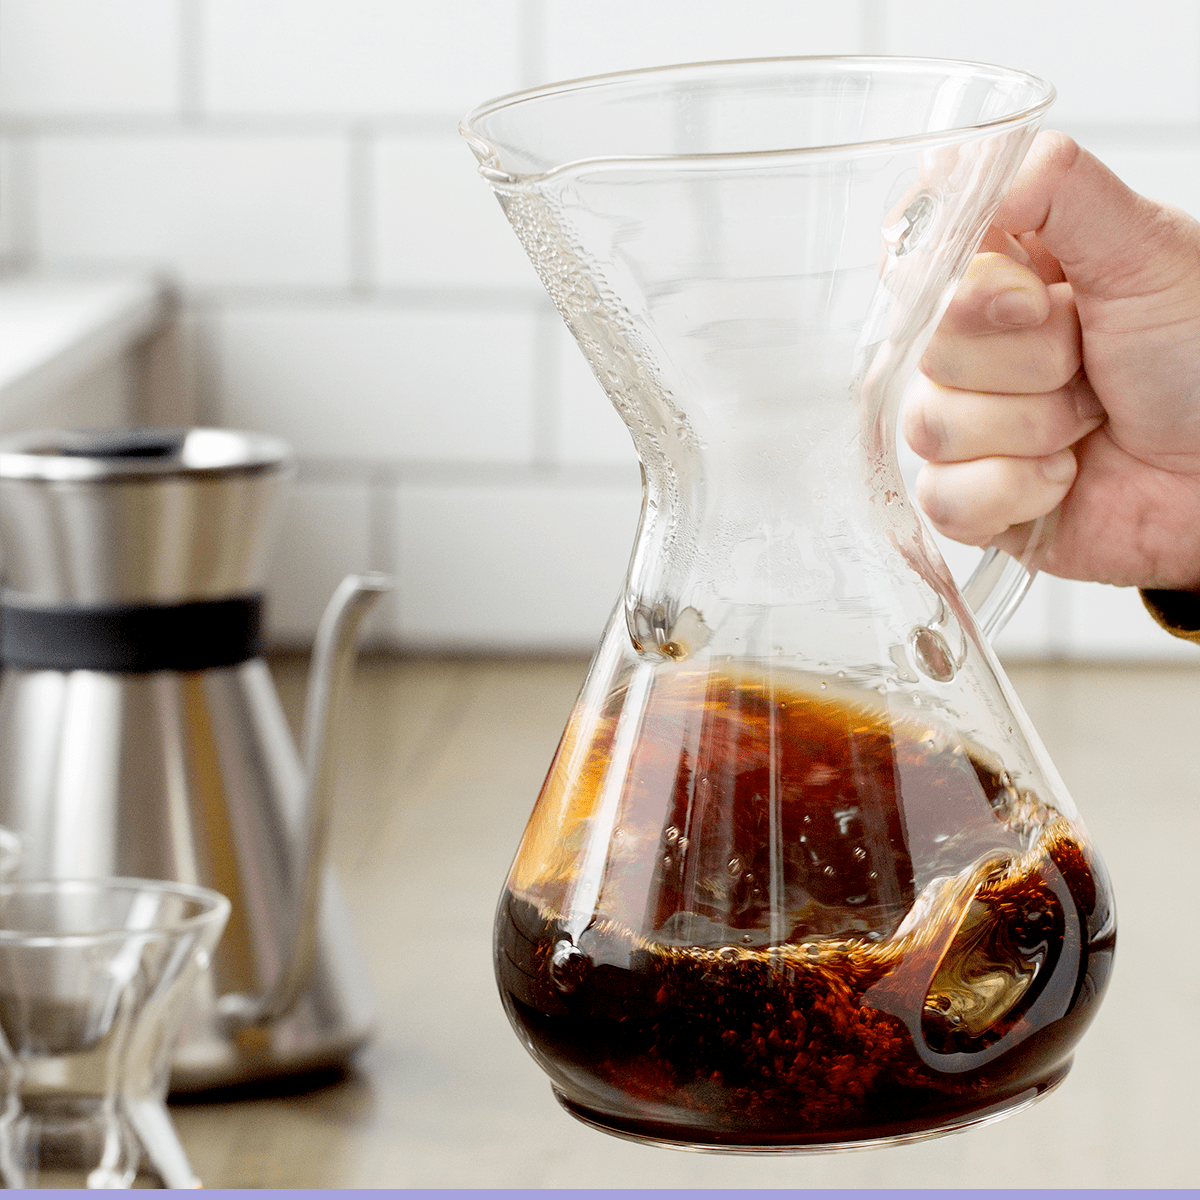 Chemex Brew Method: The Long Pour, by Olly J